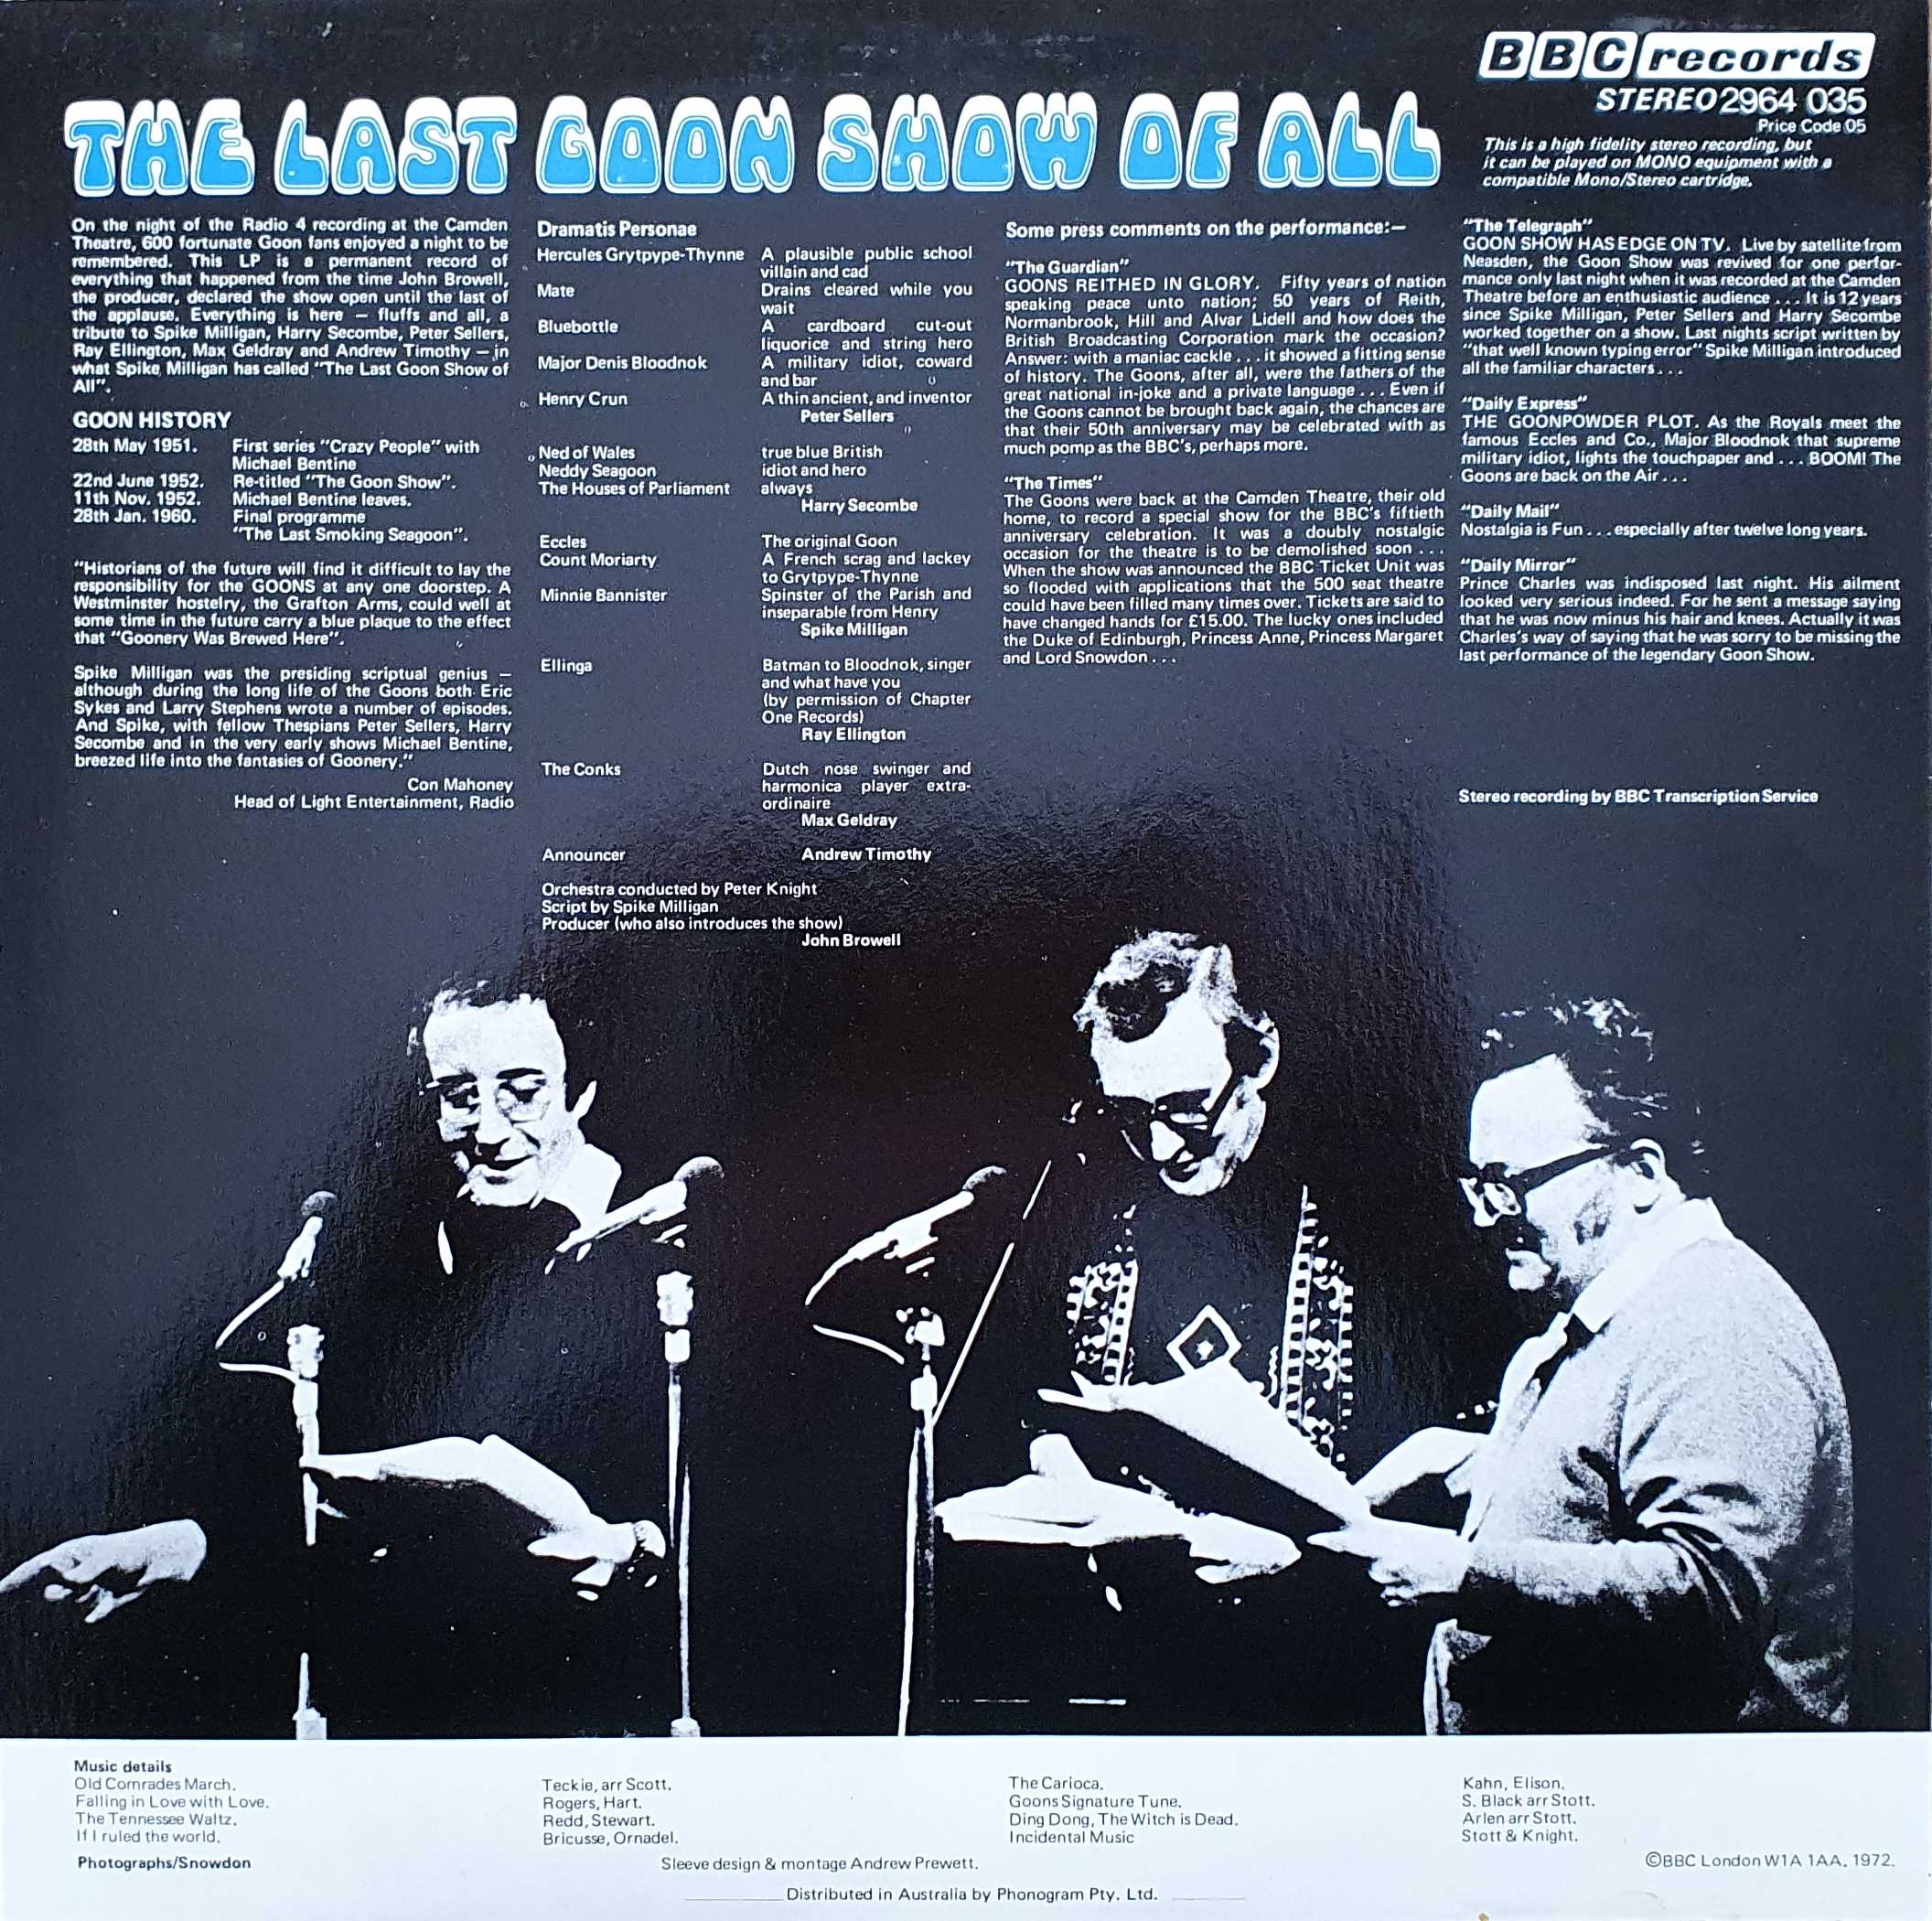 Picture of 2964 035 The last Goon Show of all by artist The Goon Show from the BBC records and Tapes library